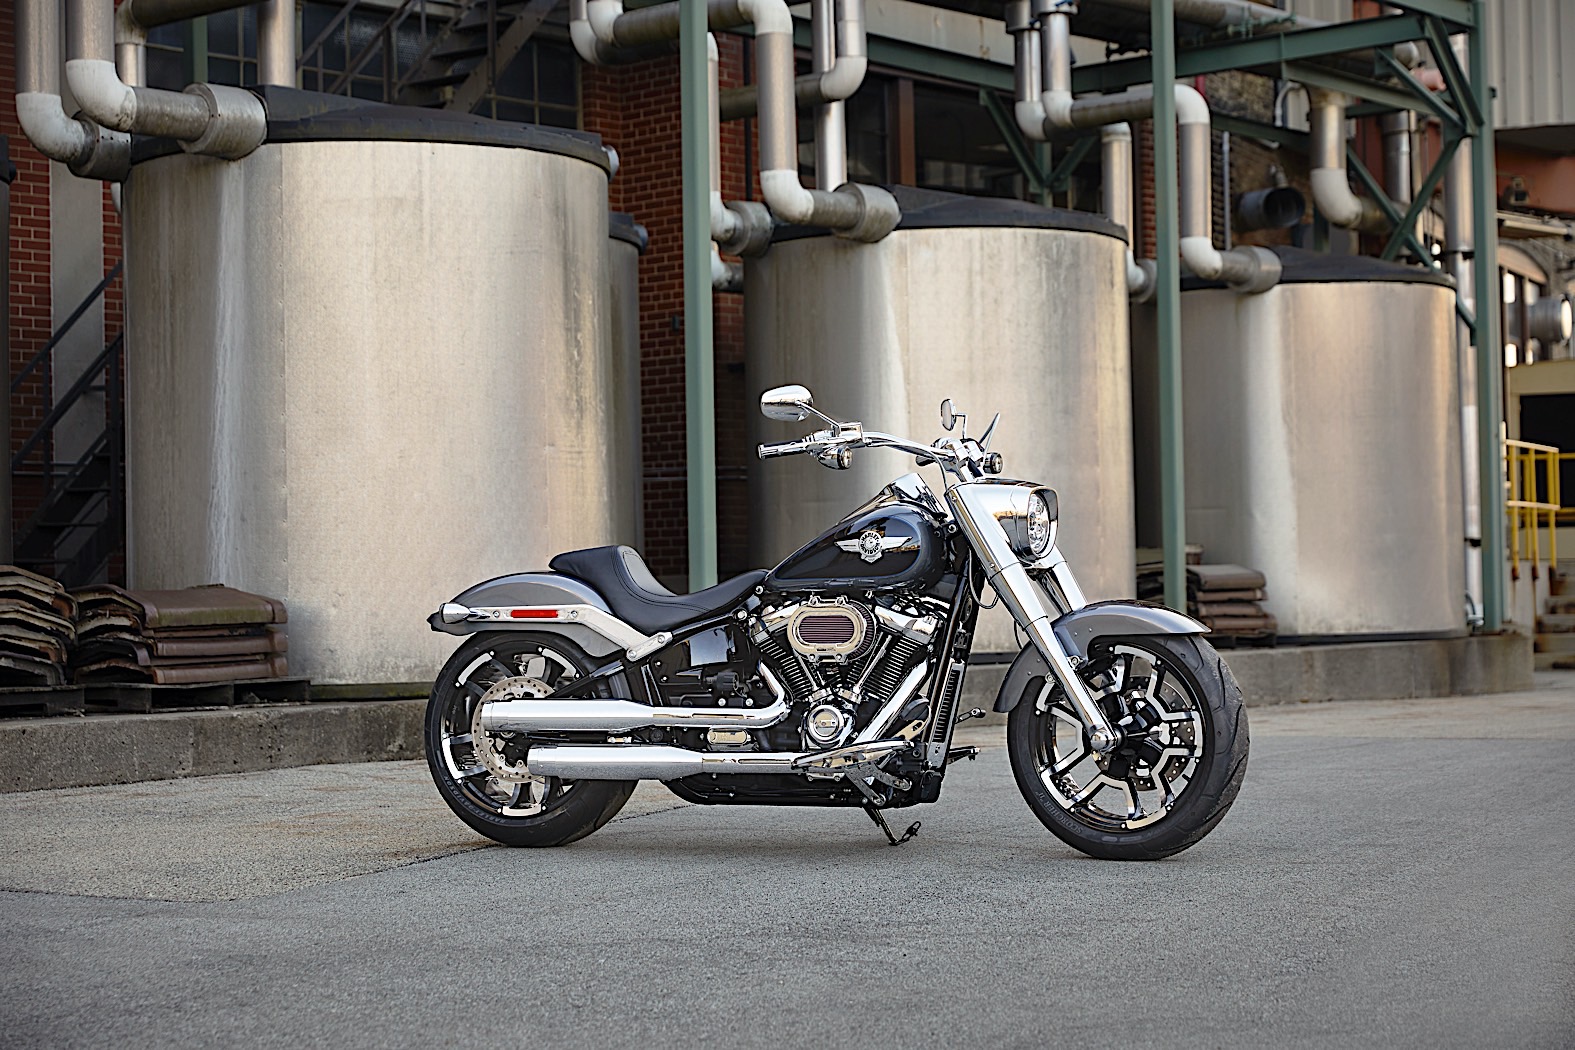 2021 Harley Davidson Fat Boy Packs The Bulk Of Accessories Available In 2021 Autoevolution